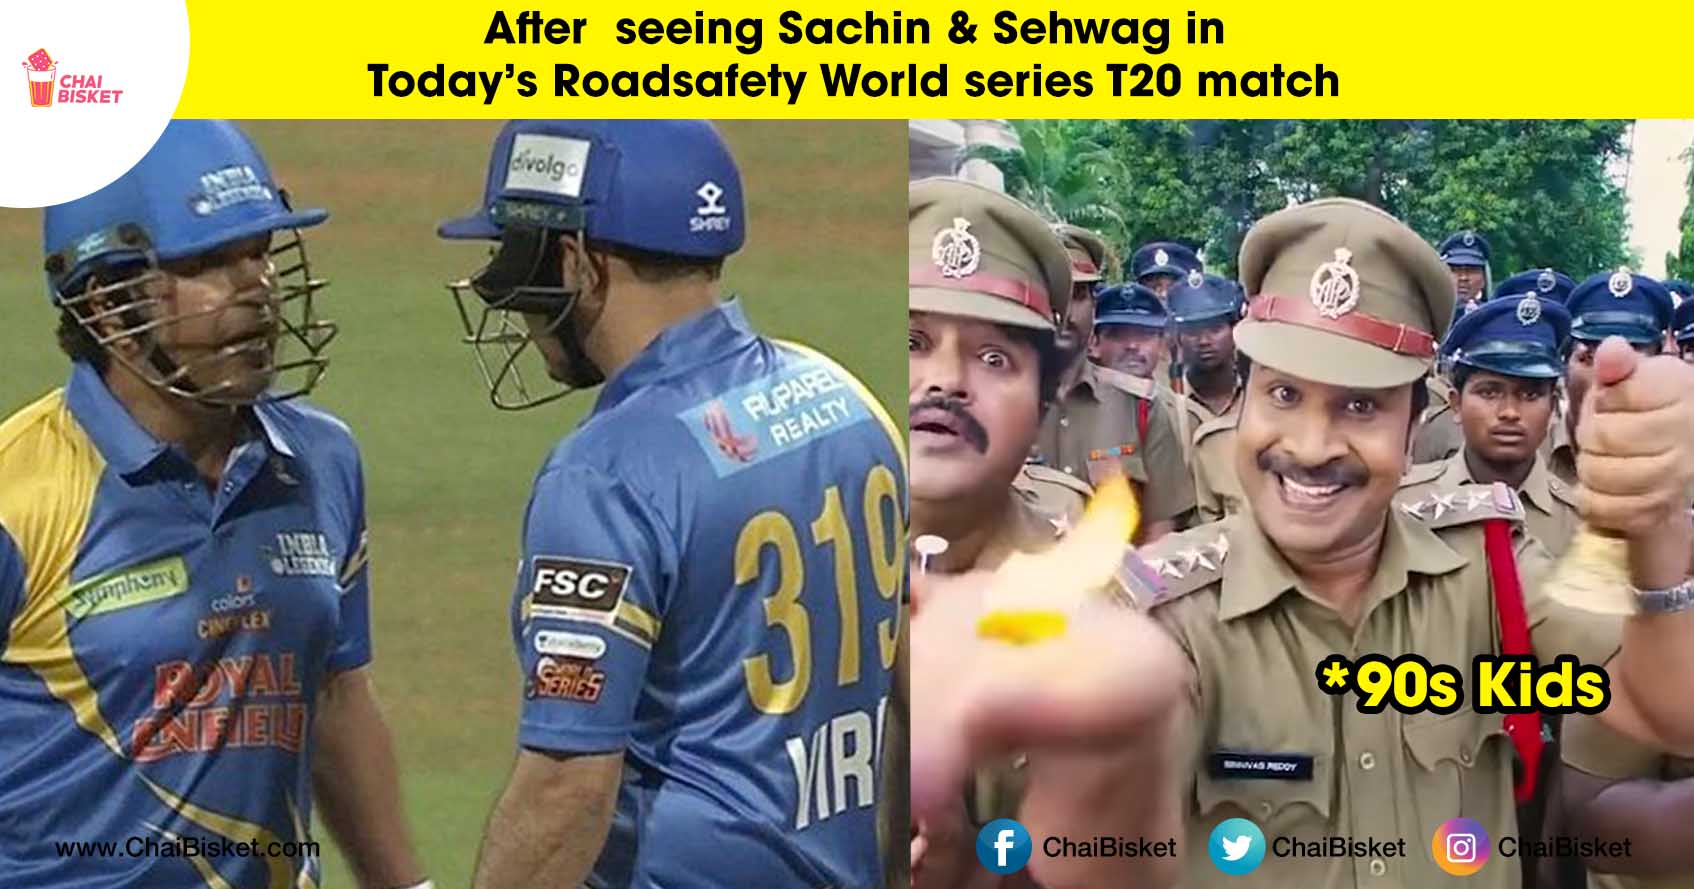 These Memes Sum Up India Legends vs West Indies Legends World Series T20 Match In A Nutshell